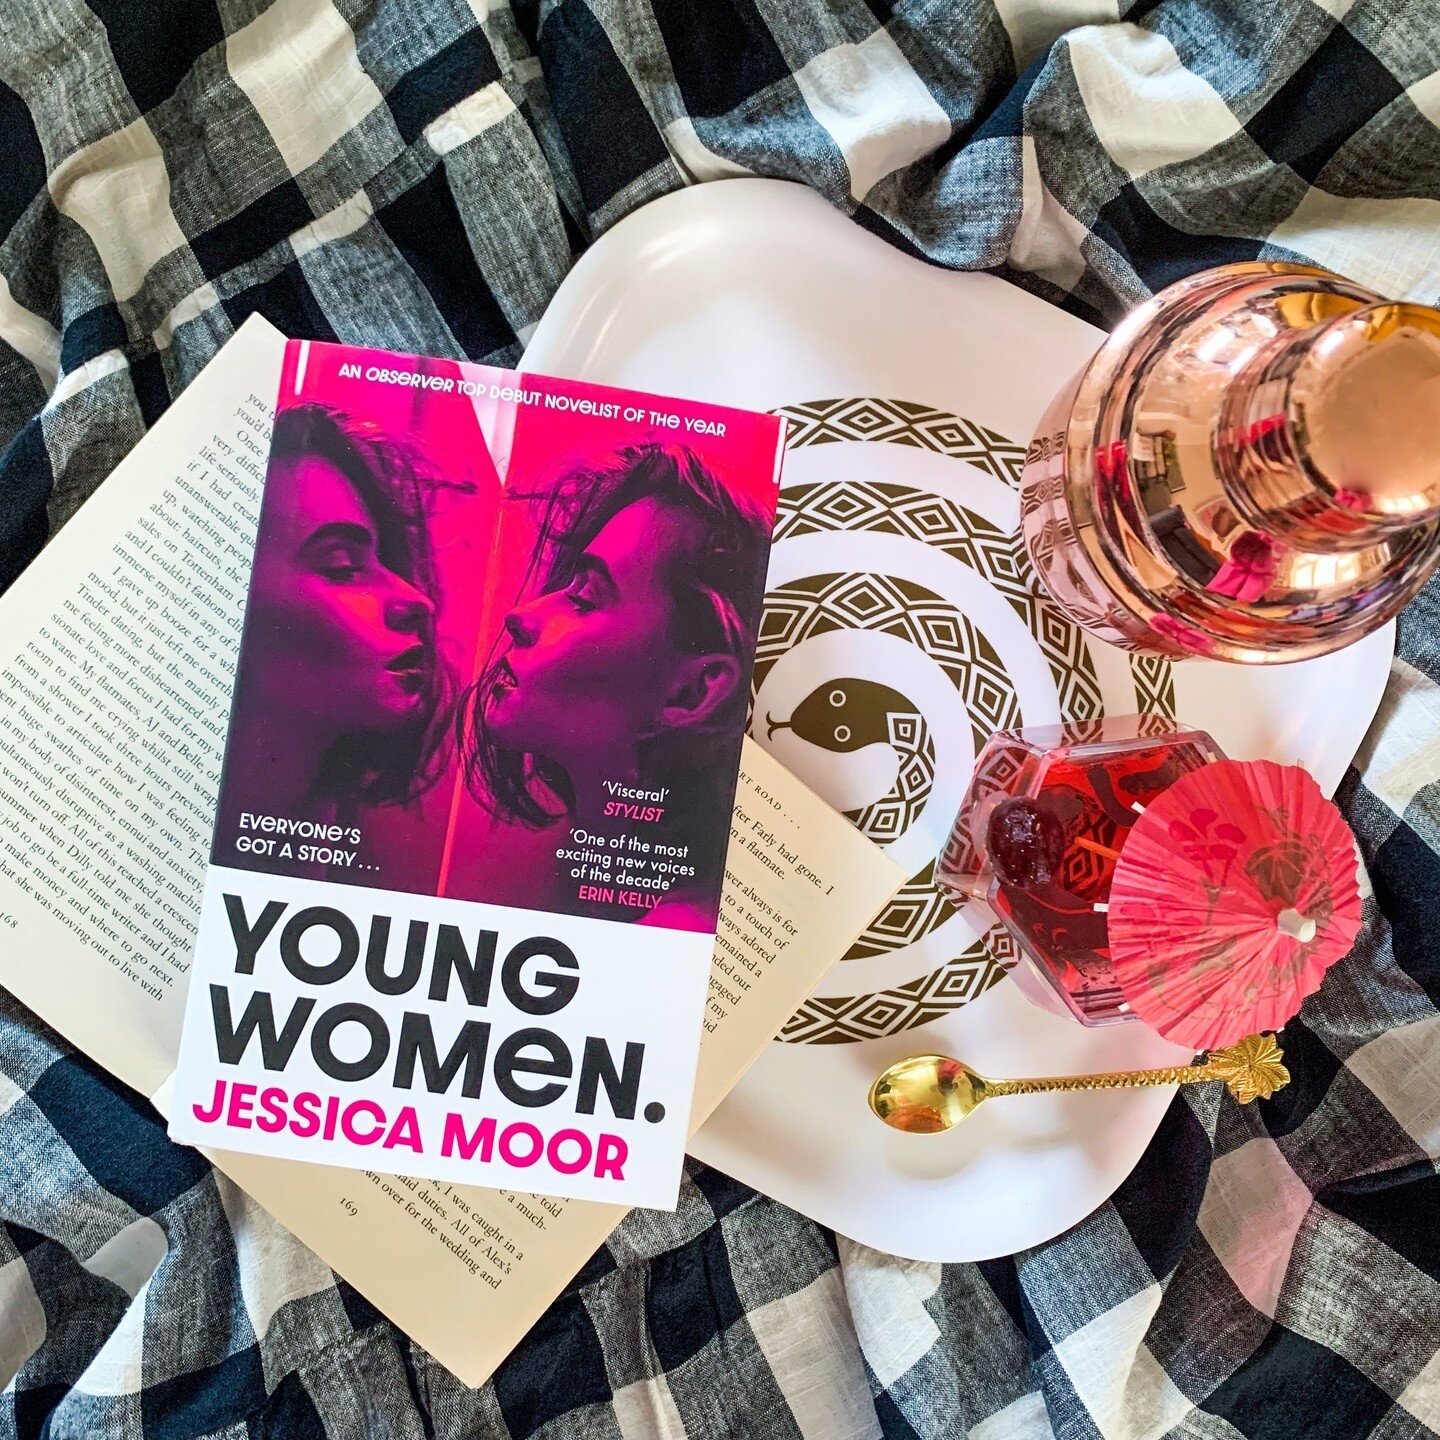 Happy Publication Day to Young Women by Jessica Moor! 🥳⁠
⁠
Young Women is a thought provoking insight into adult friendship and our individual complicity in the patriarchy. This is the book everyone is going to be talking about, so be sure to pick u